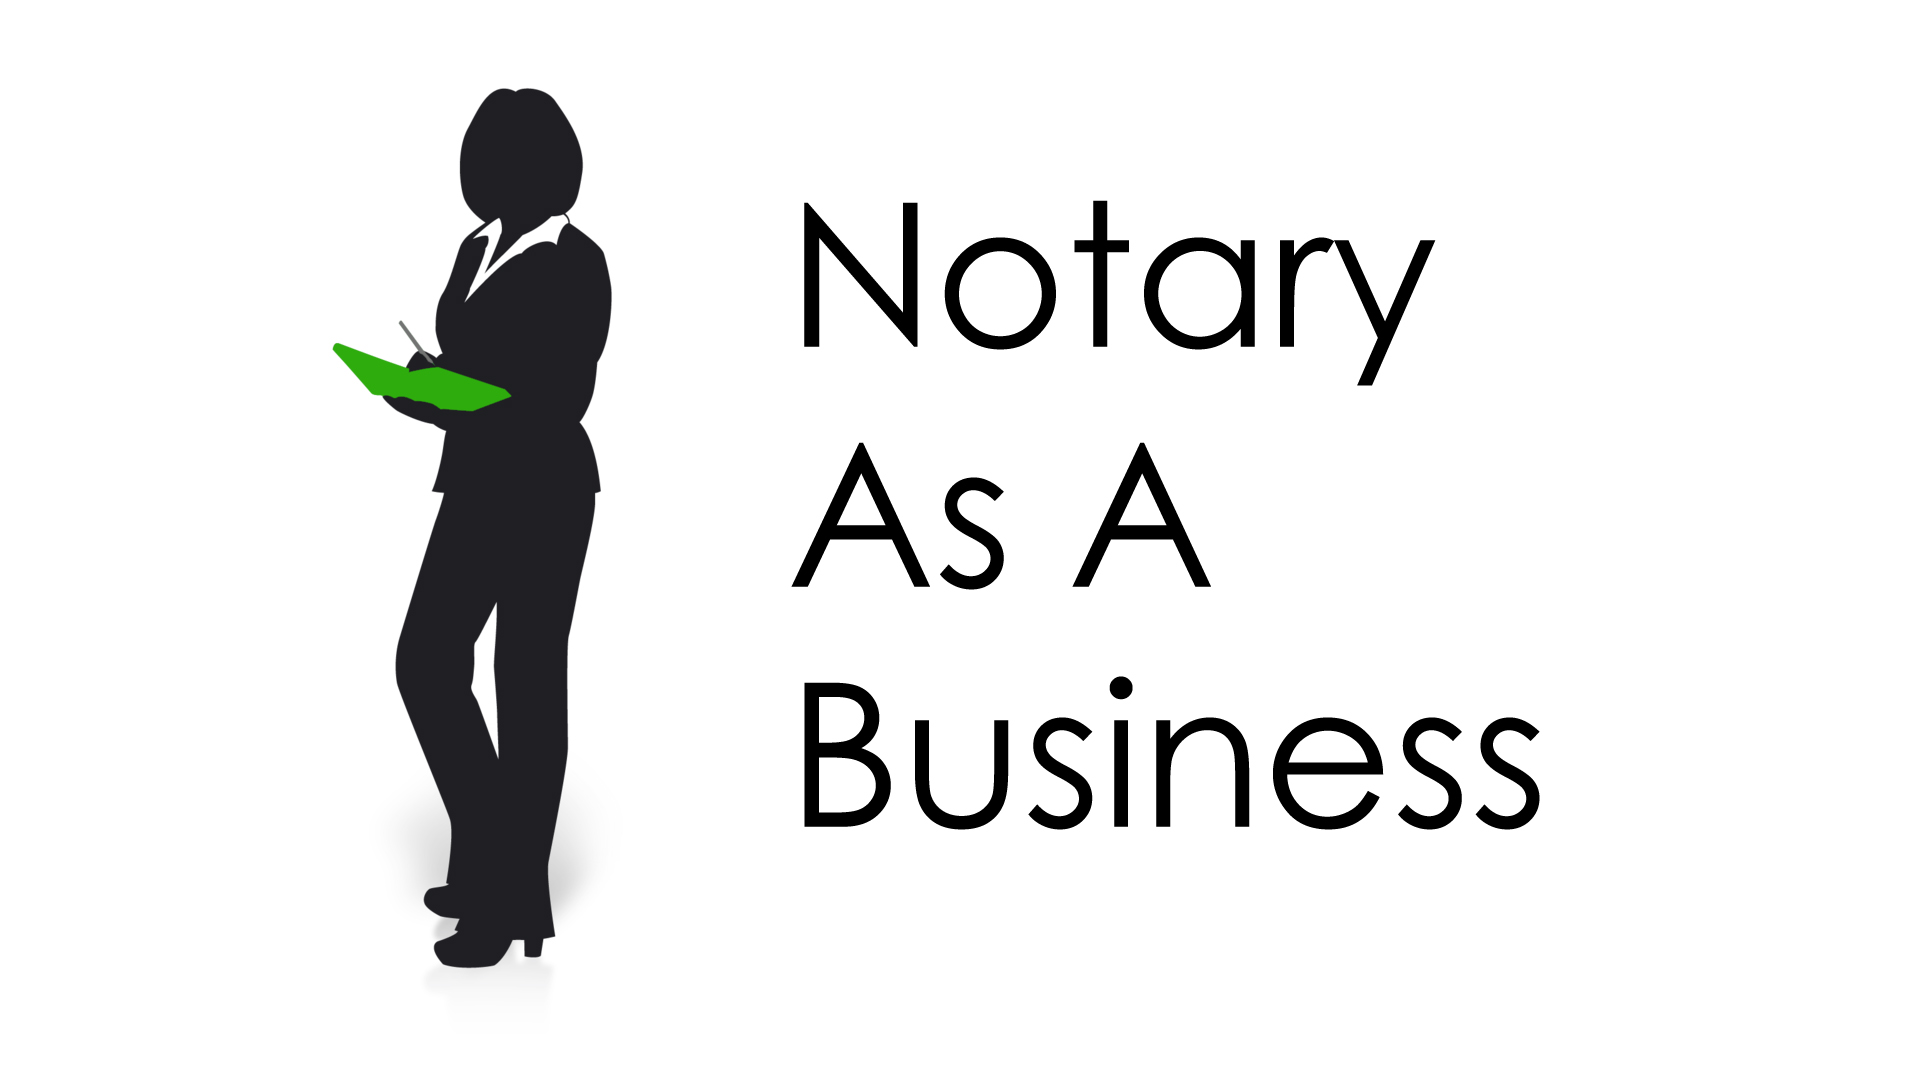 notary-as-a-business-cynanotary